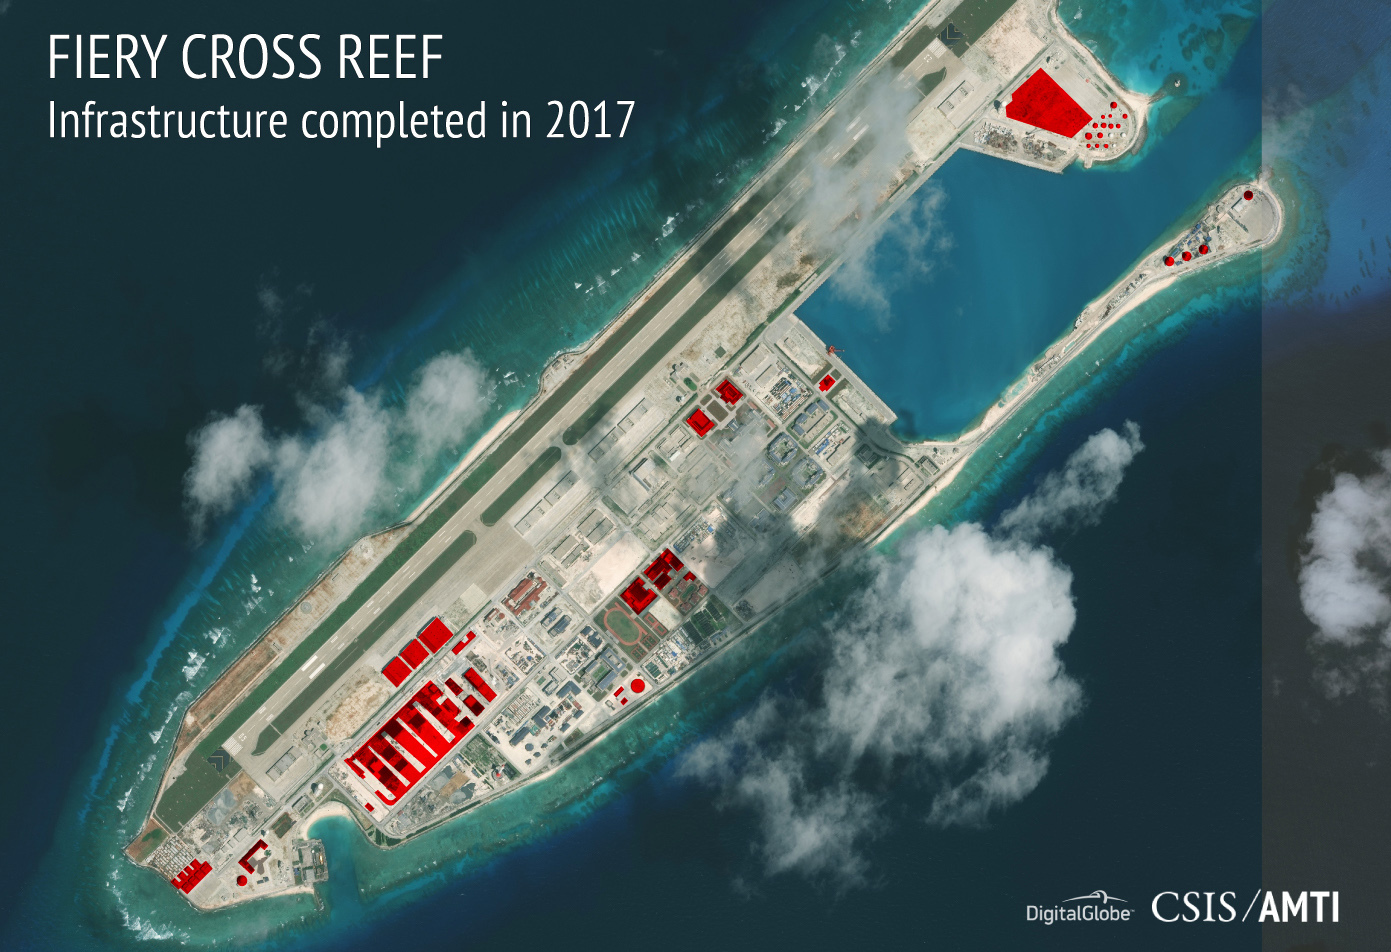 An annotated satellite image of Fiery Cross Reef in the Spratly island chain of the South China Sea shows areas where China has conducted construction work above ground during 2017. | CSIS ASIA MARITIME TRANSPARENCY INITIATIVE/DIGITALGLOBE / VIA AP